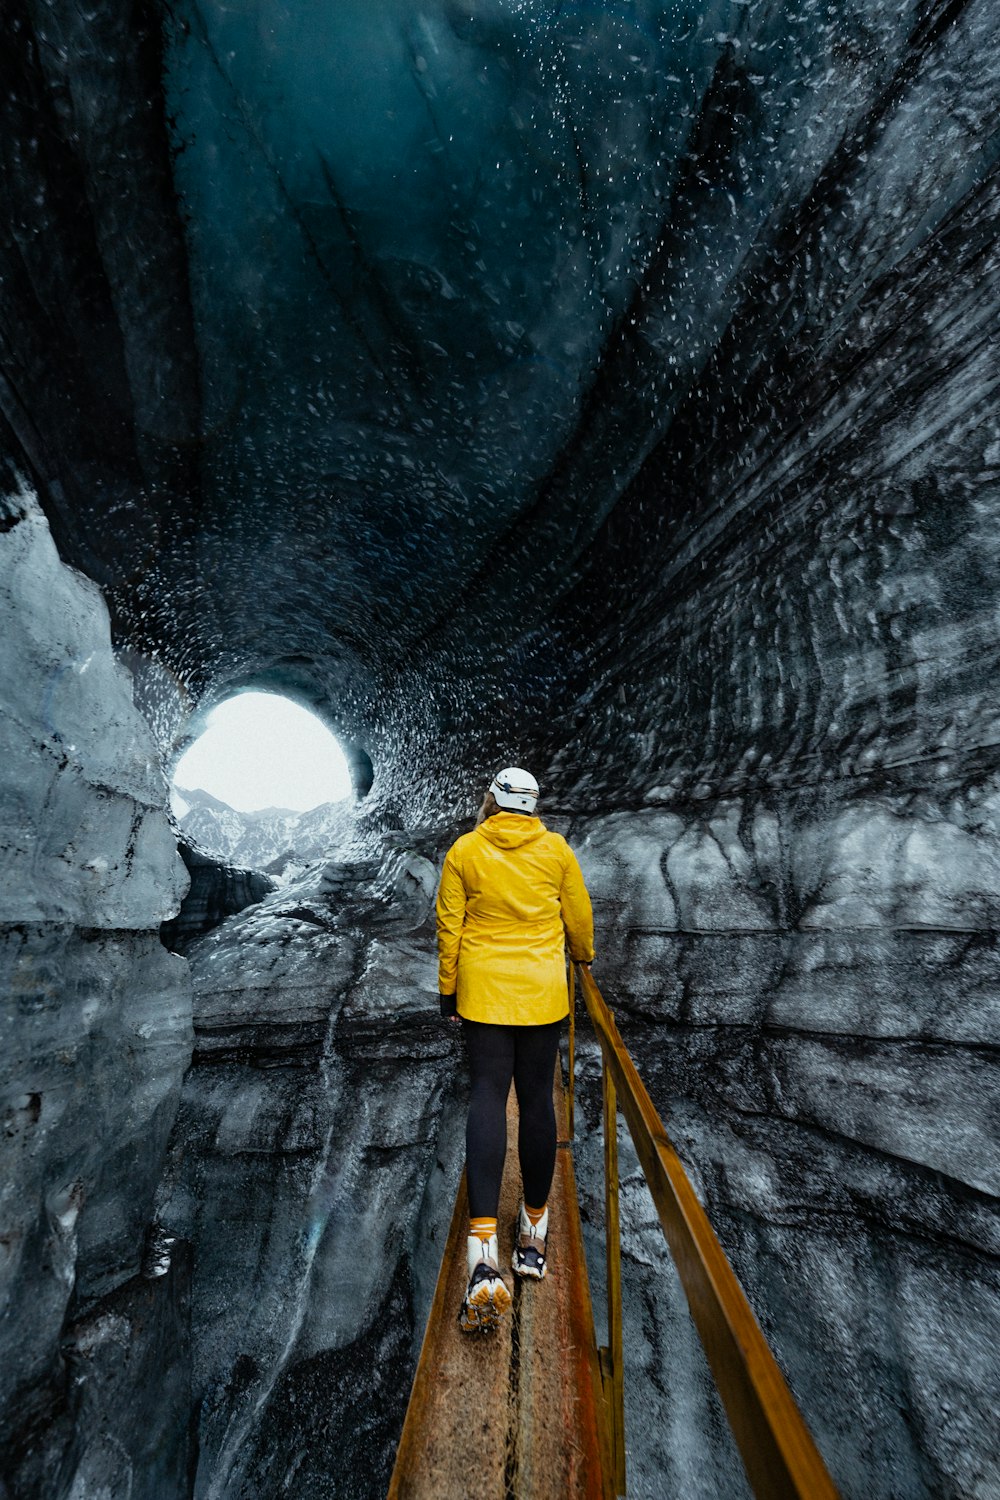 a person in a yellow jacket is walking through a tunnel